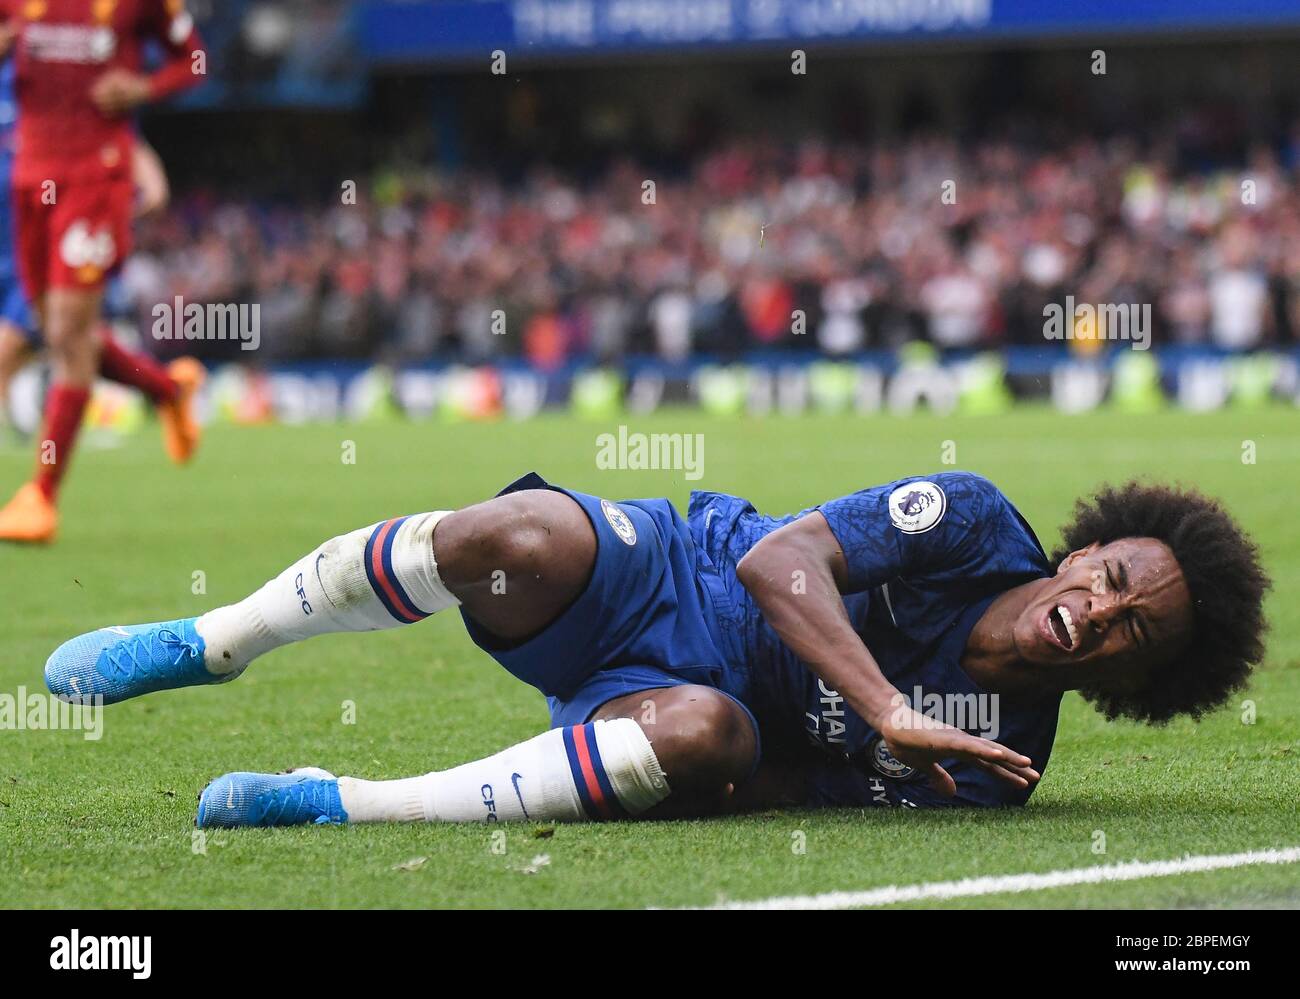 LONDON, ENGLAND - SEPTEMBER 22, 2019: Willian Borges da Silva of Chelsea pictured during the 2019/20 Premier League game between Chelsea FC and Liverpool FC at Stamford Bridge. Stock Photo